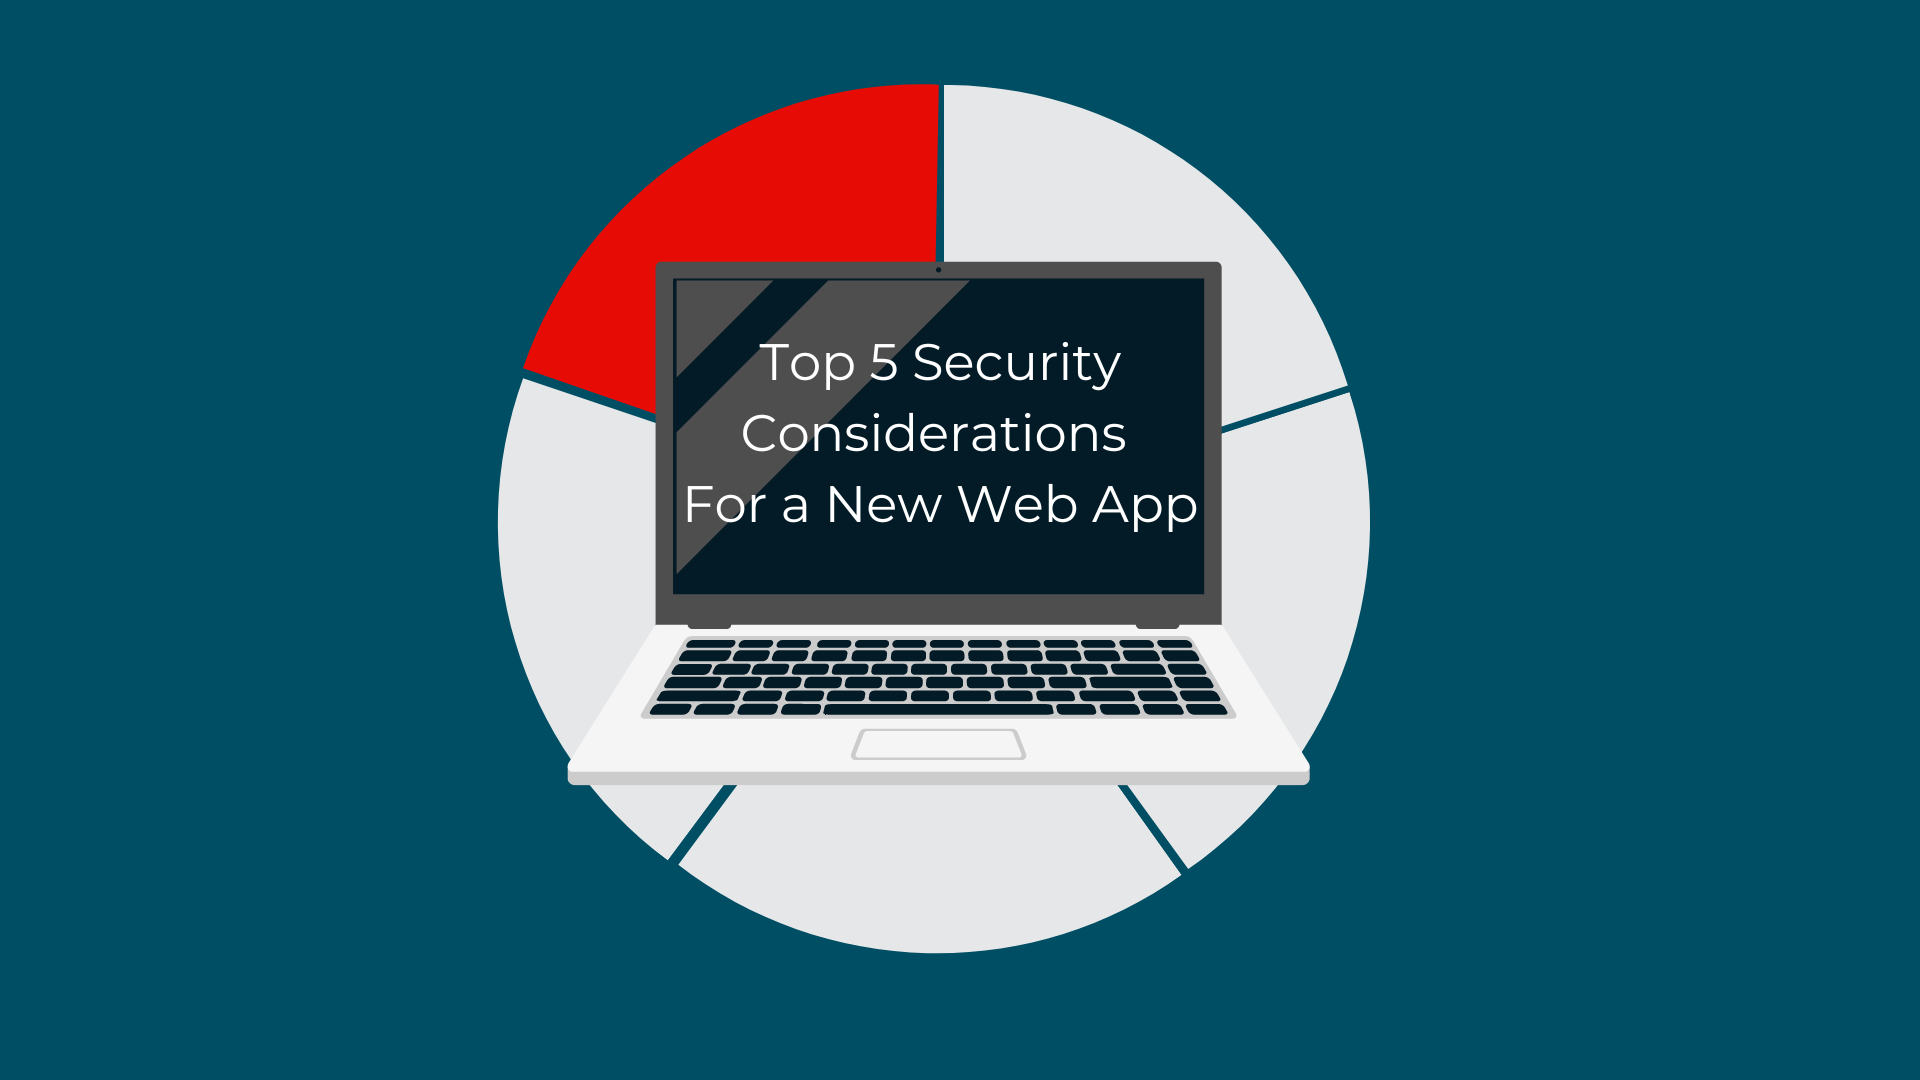 Top 5 Security Considerations for a New Web App - 4. Logging and Monitoring